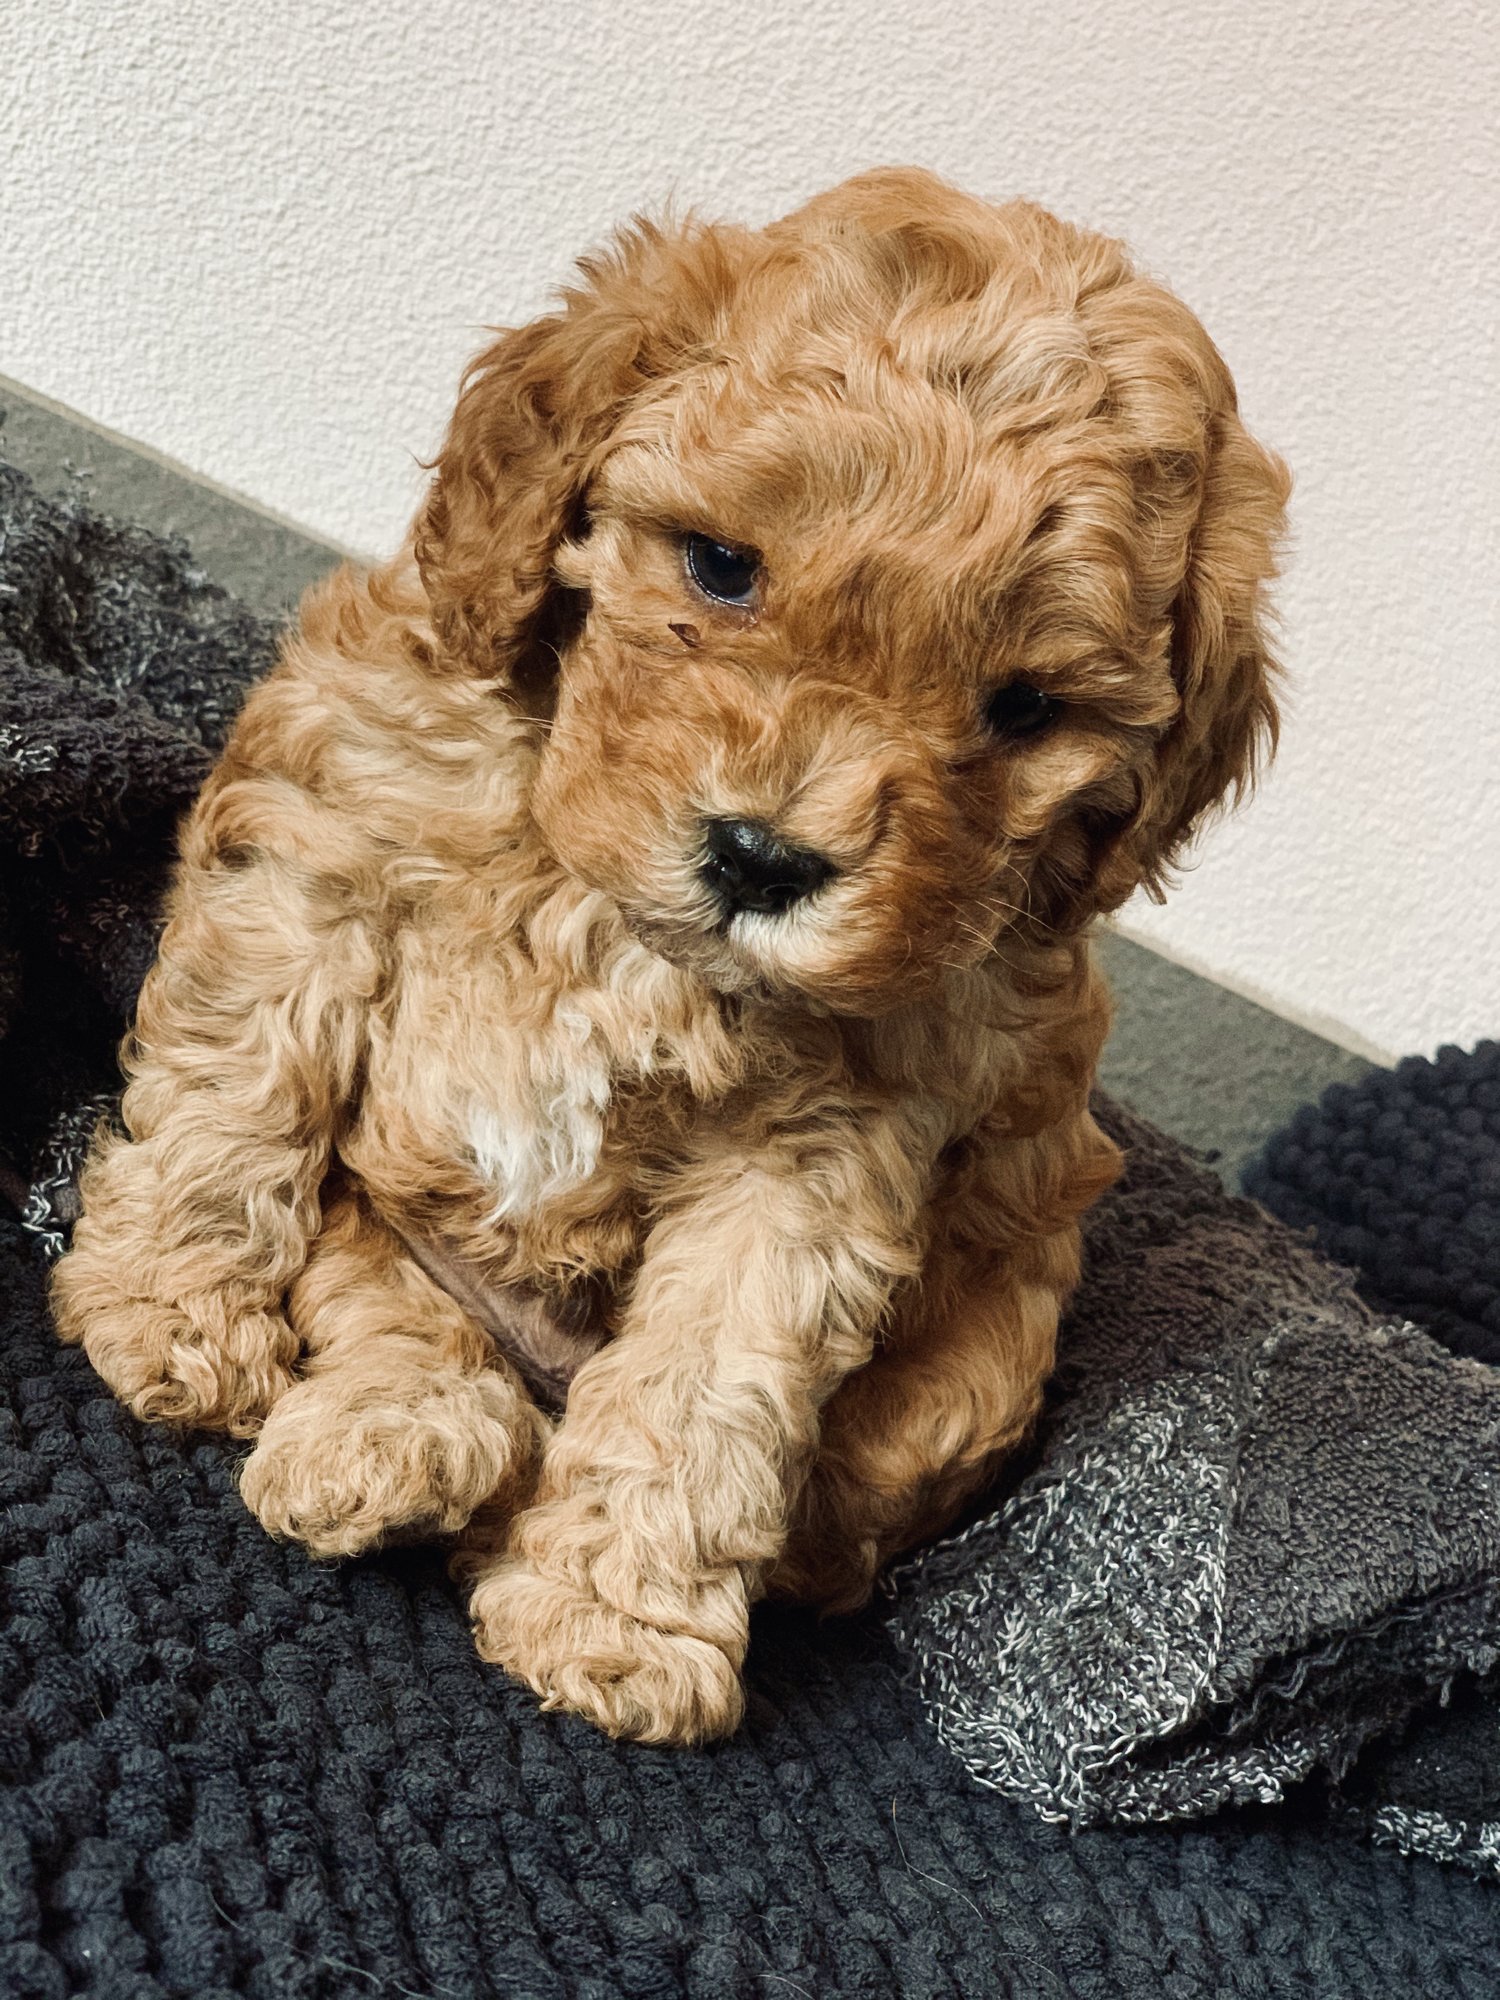 Cavoodle Puppies - Pet Adoption and Sales